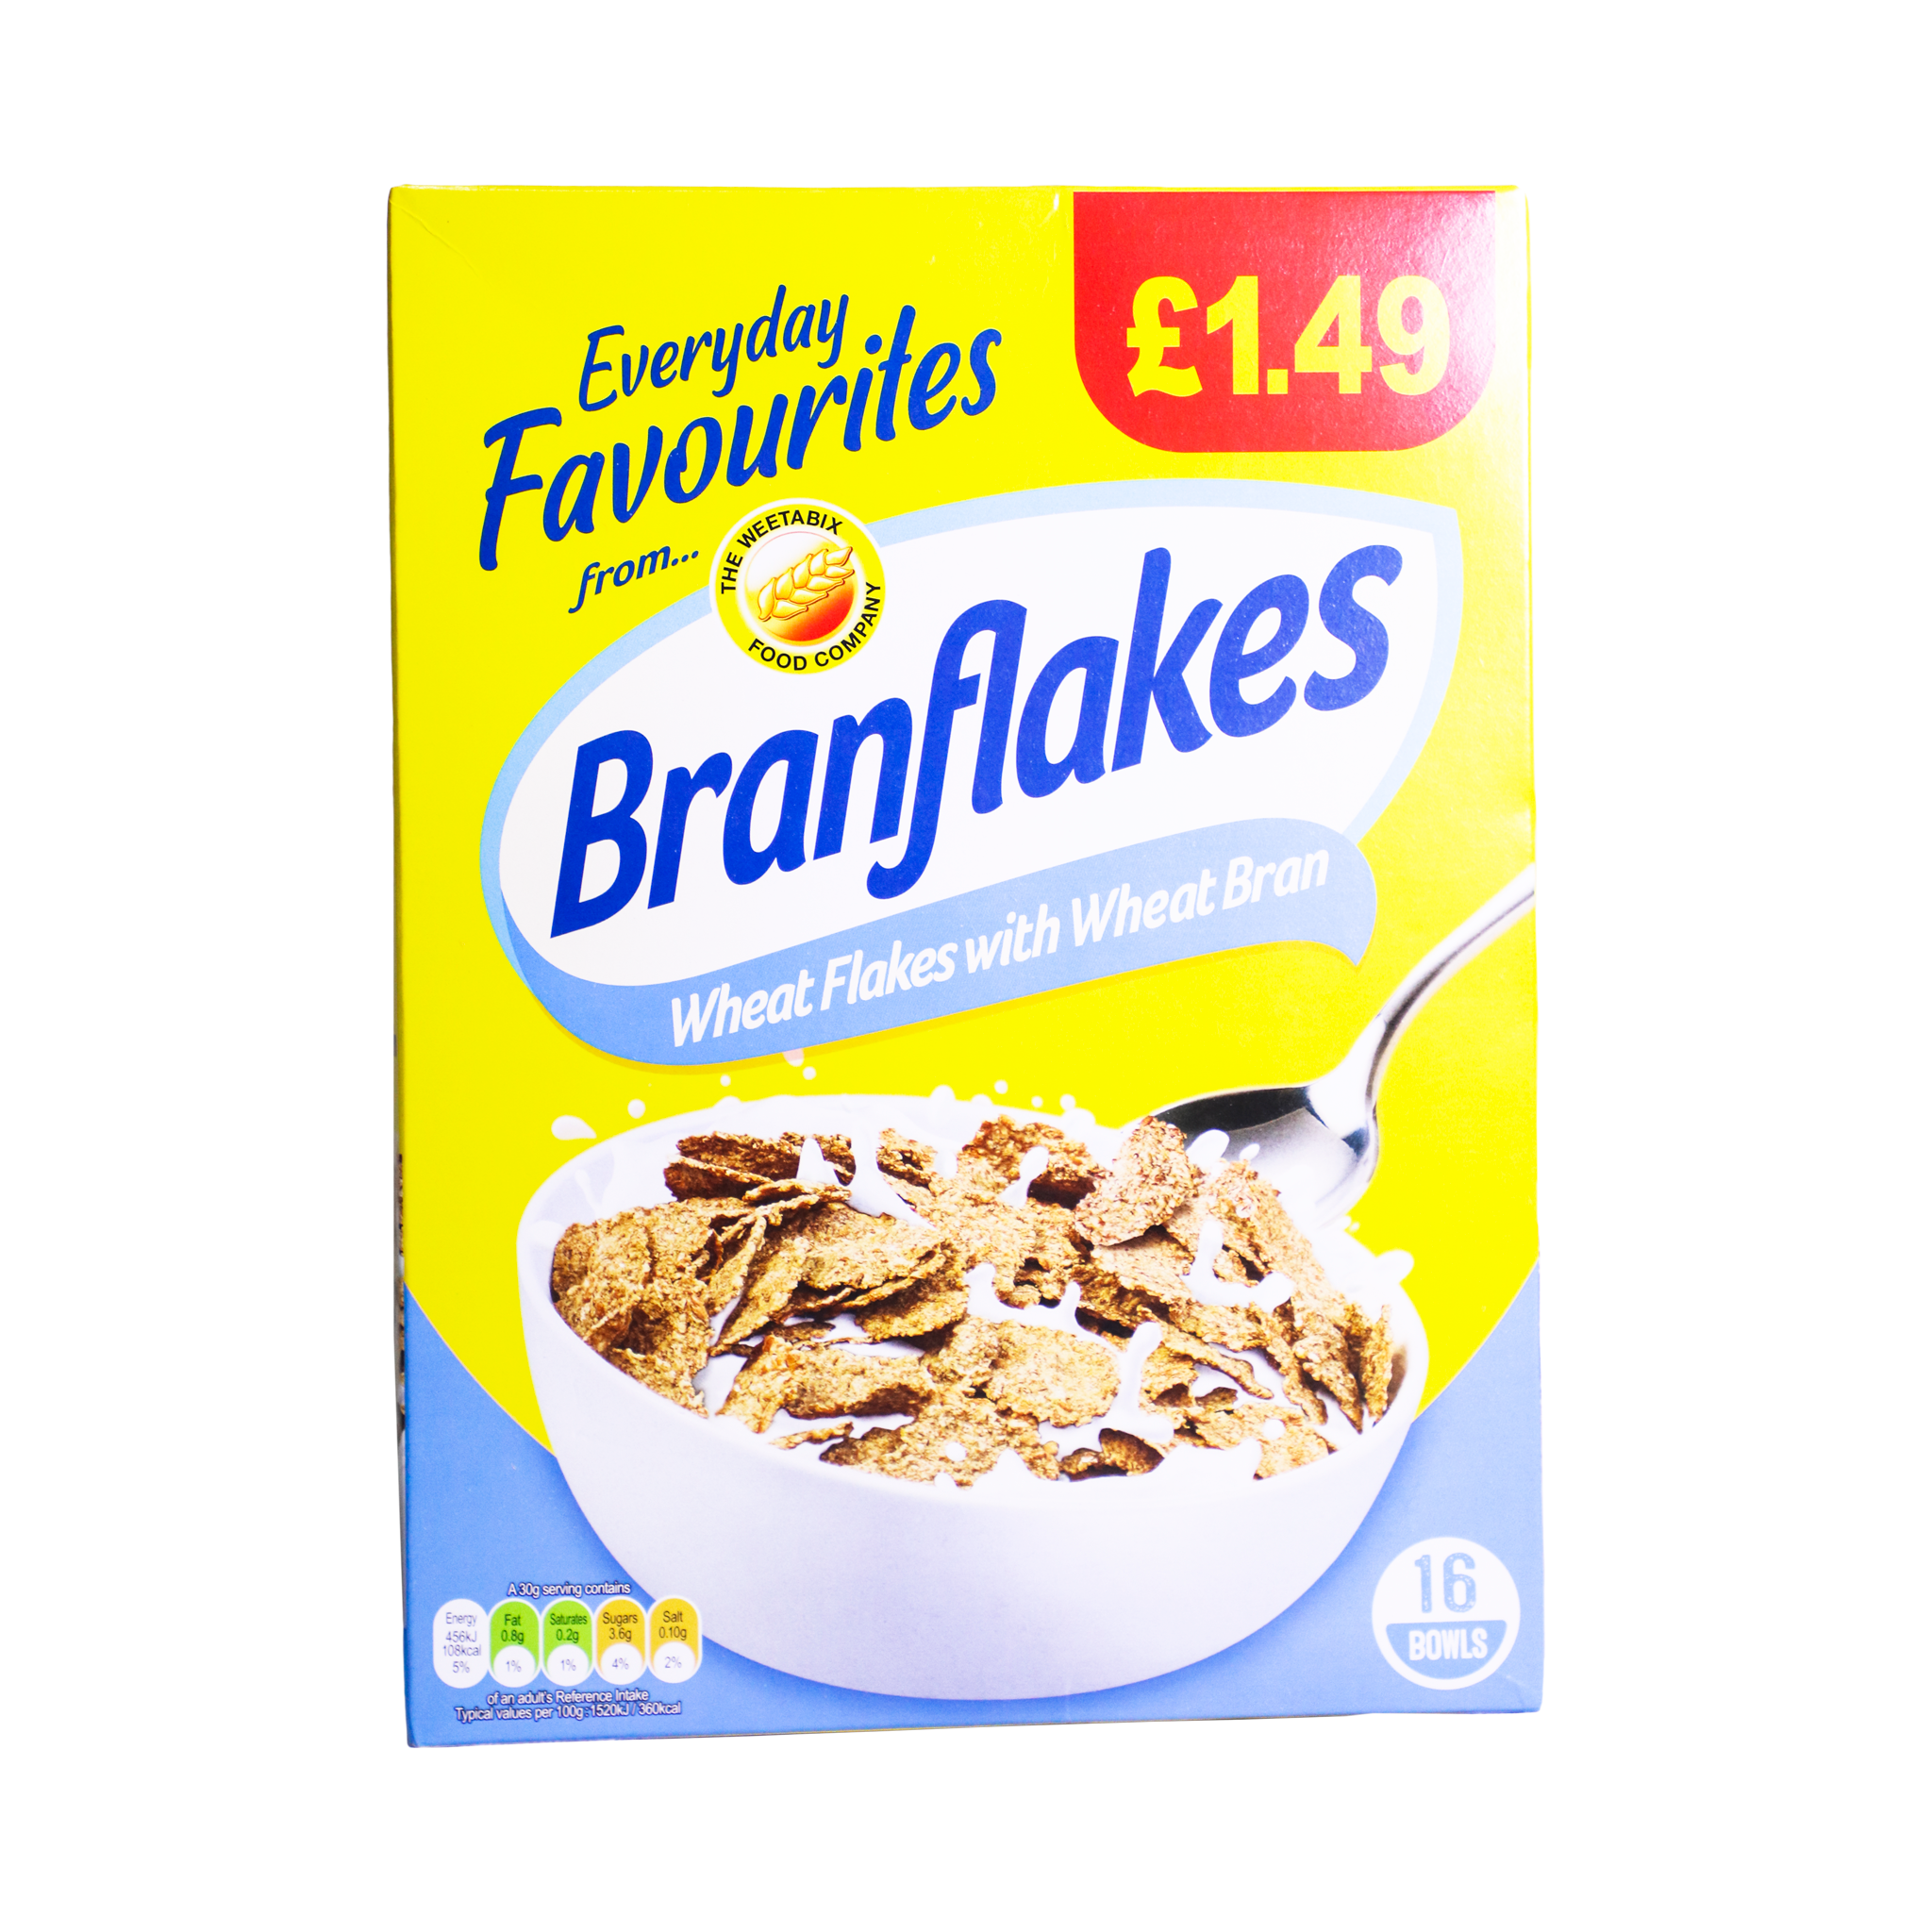 Branflakes Wheat Flakes with Wheat Bran 500g